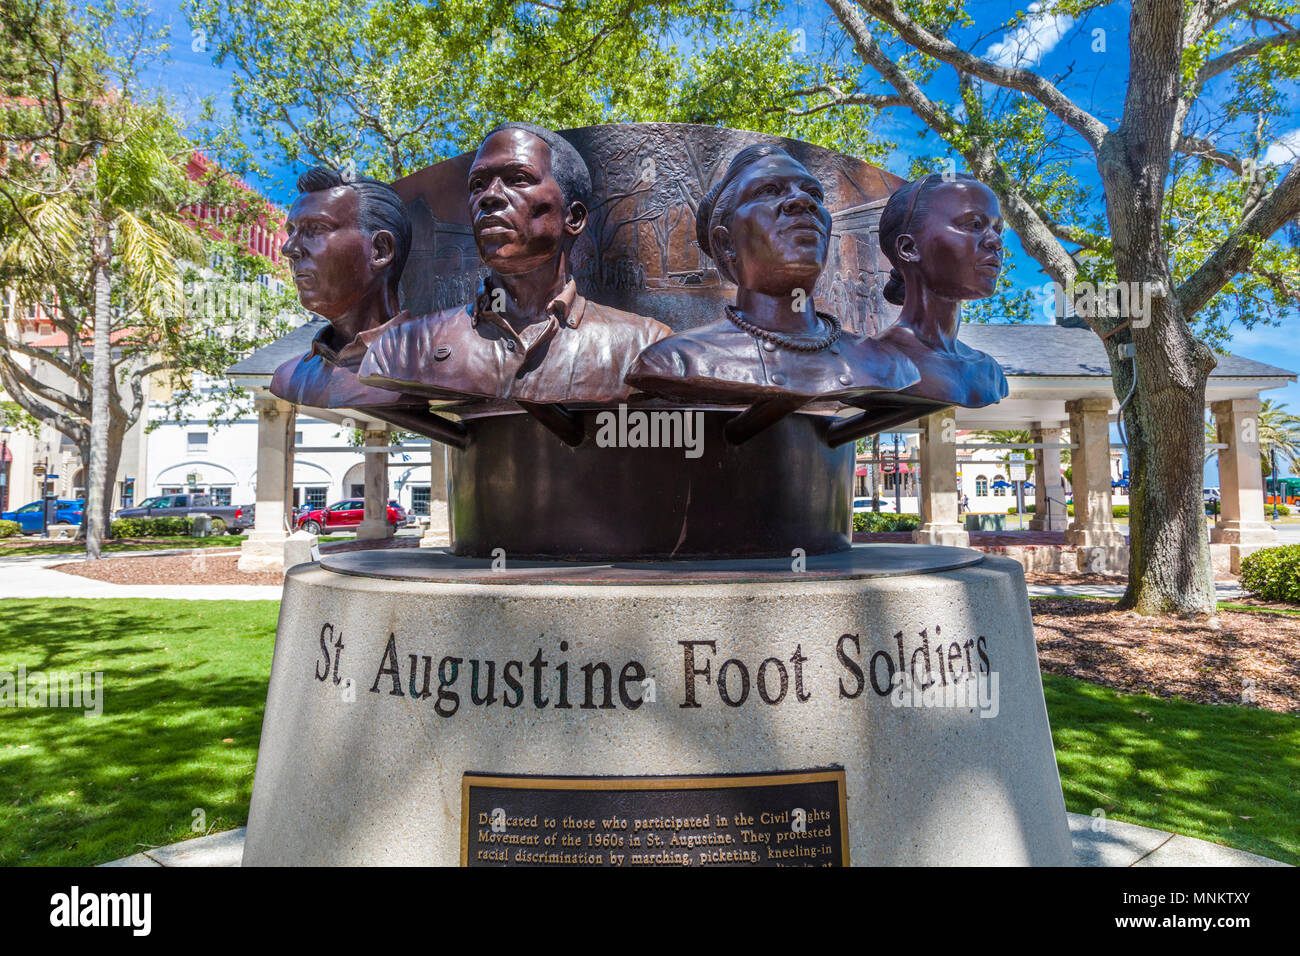 St Augustine Foot Soldiers memeorial in historic St Augustine Florida Americas oldest city Stock Photo